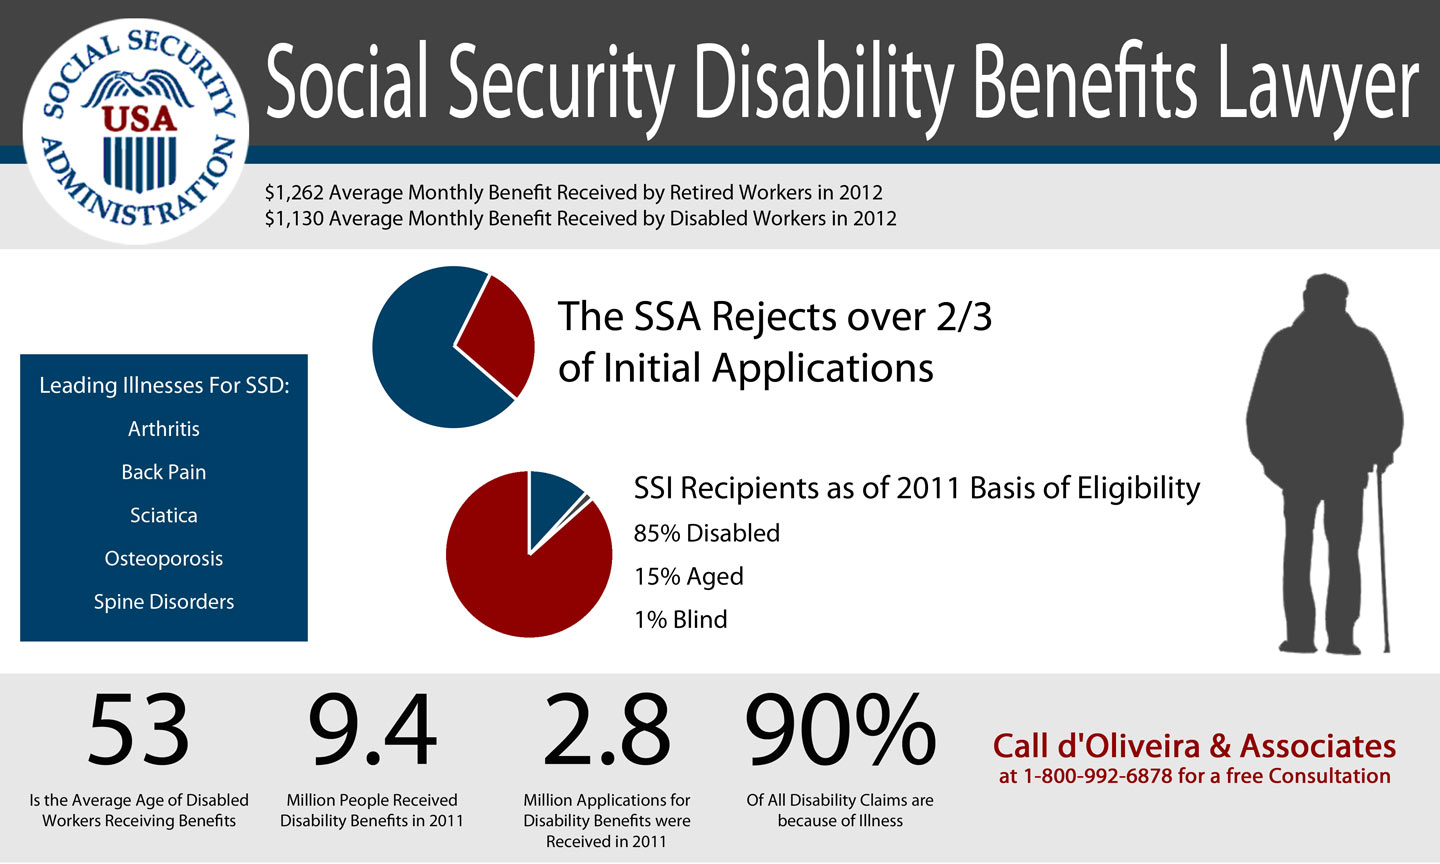 Social Security Disability Benefits Infographic with statistics on rejected applications